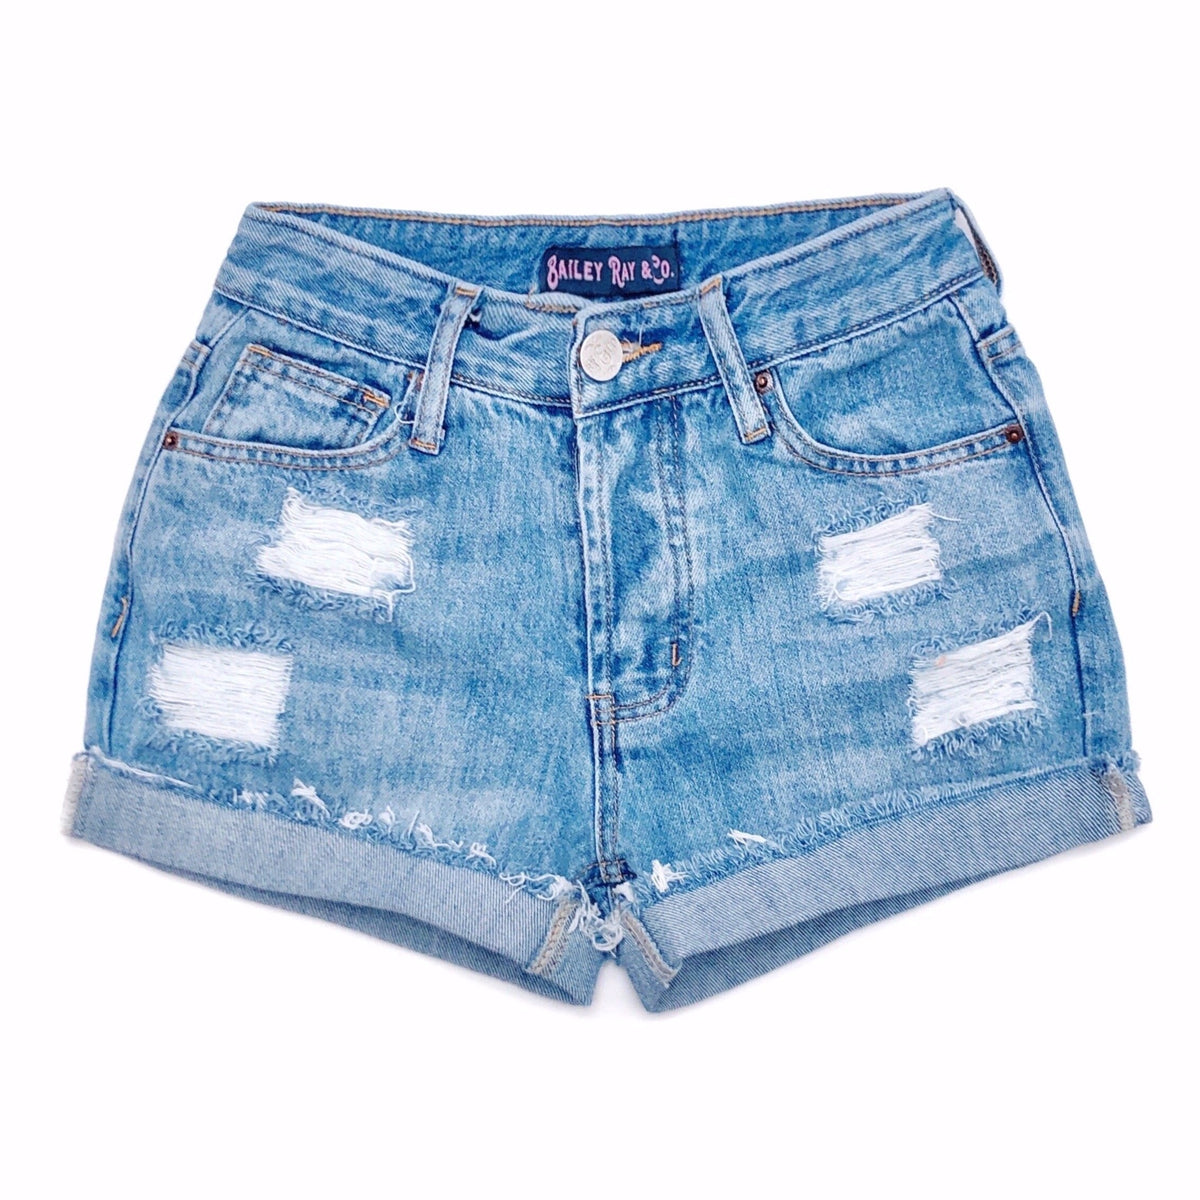 Bailey Ray and Co - Distressed High Waisted Denim Shorts - The Emily